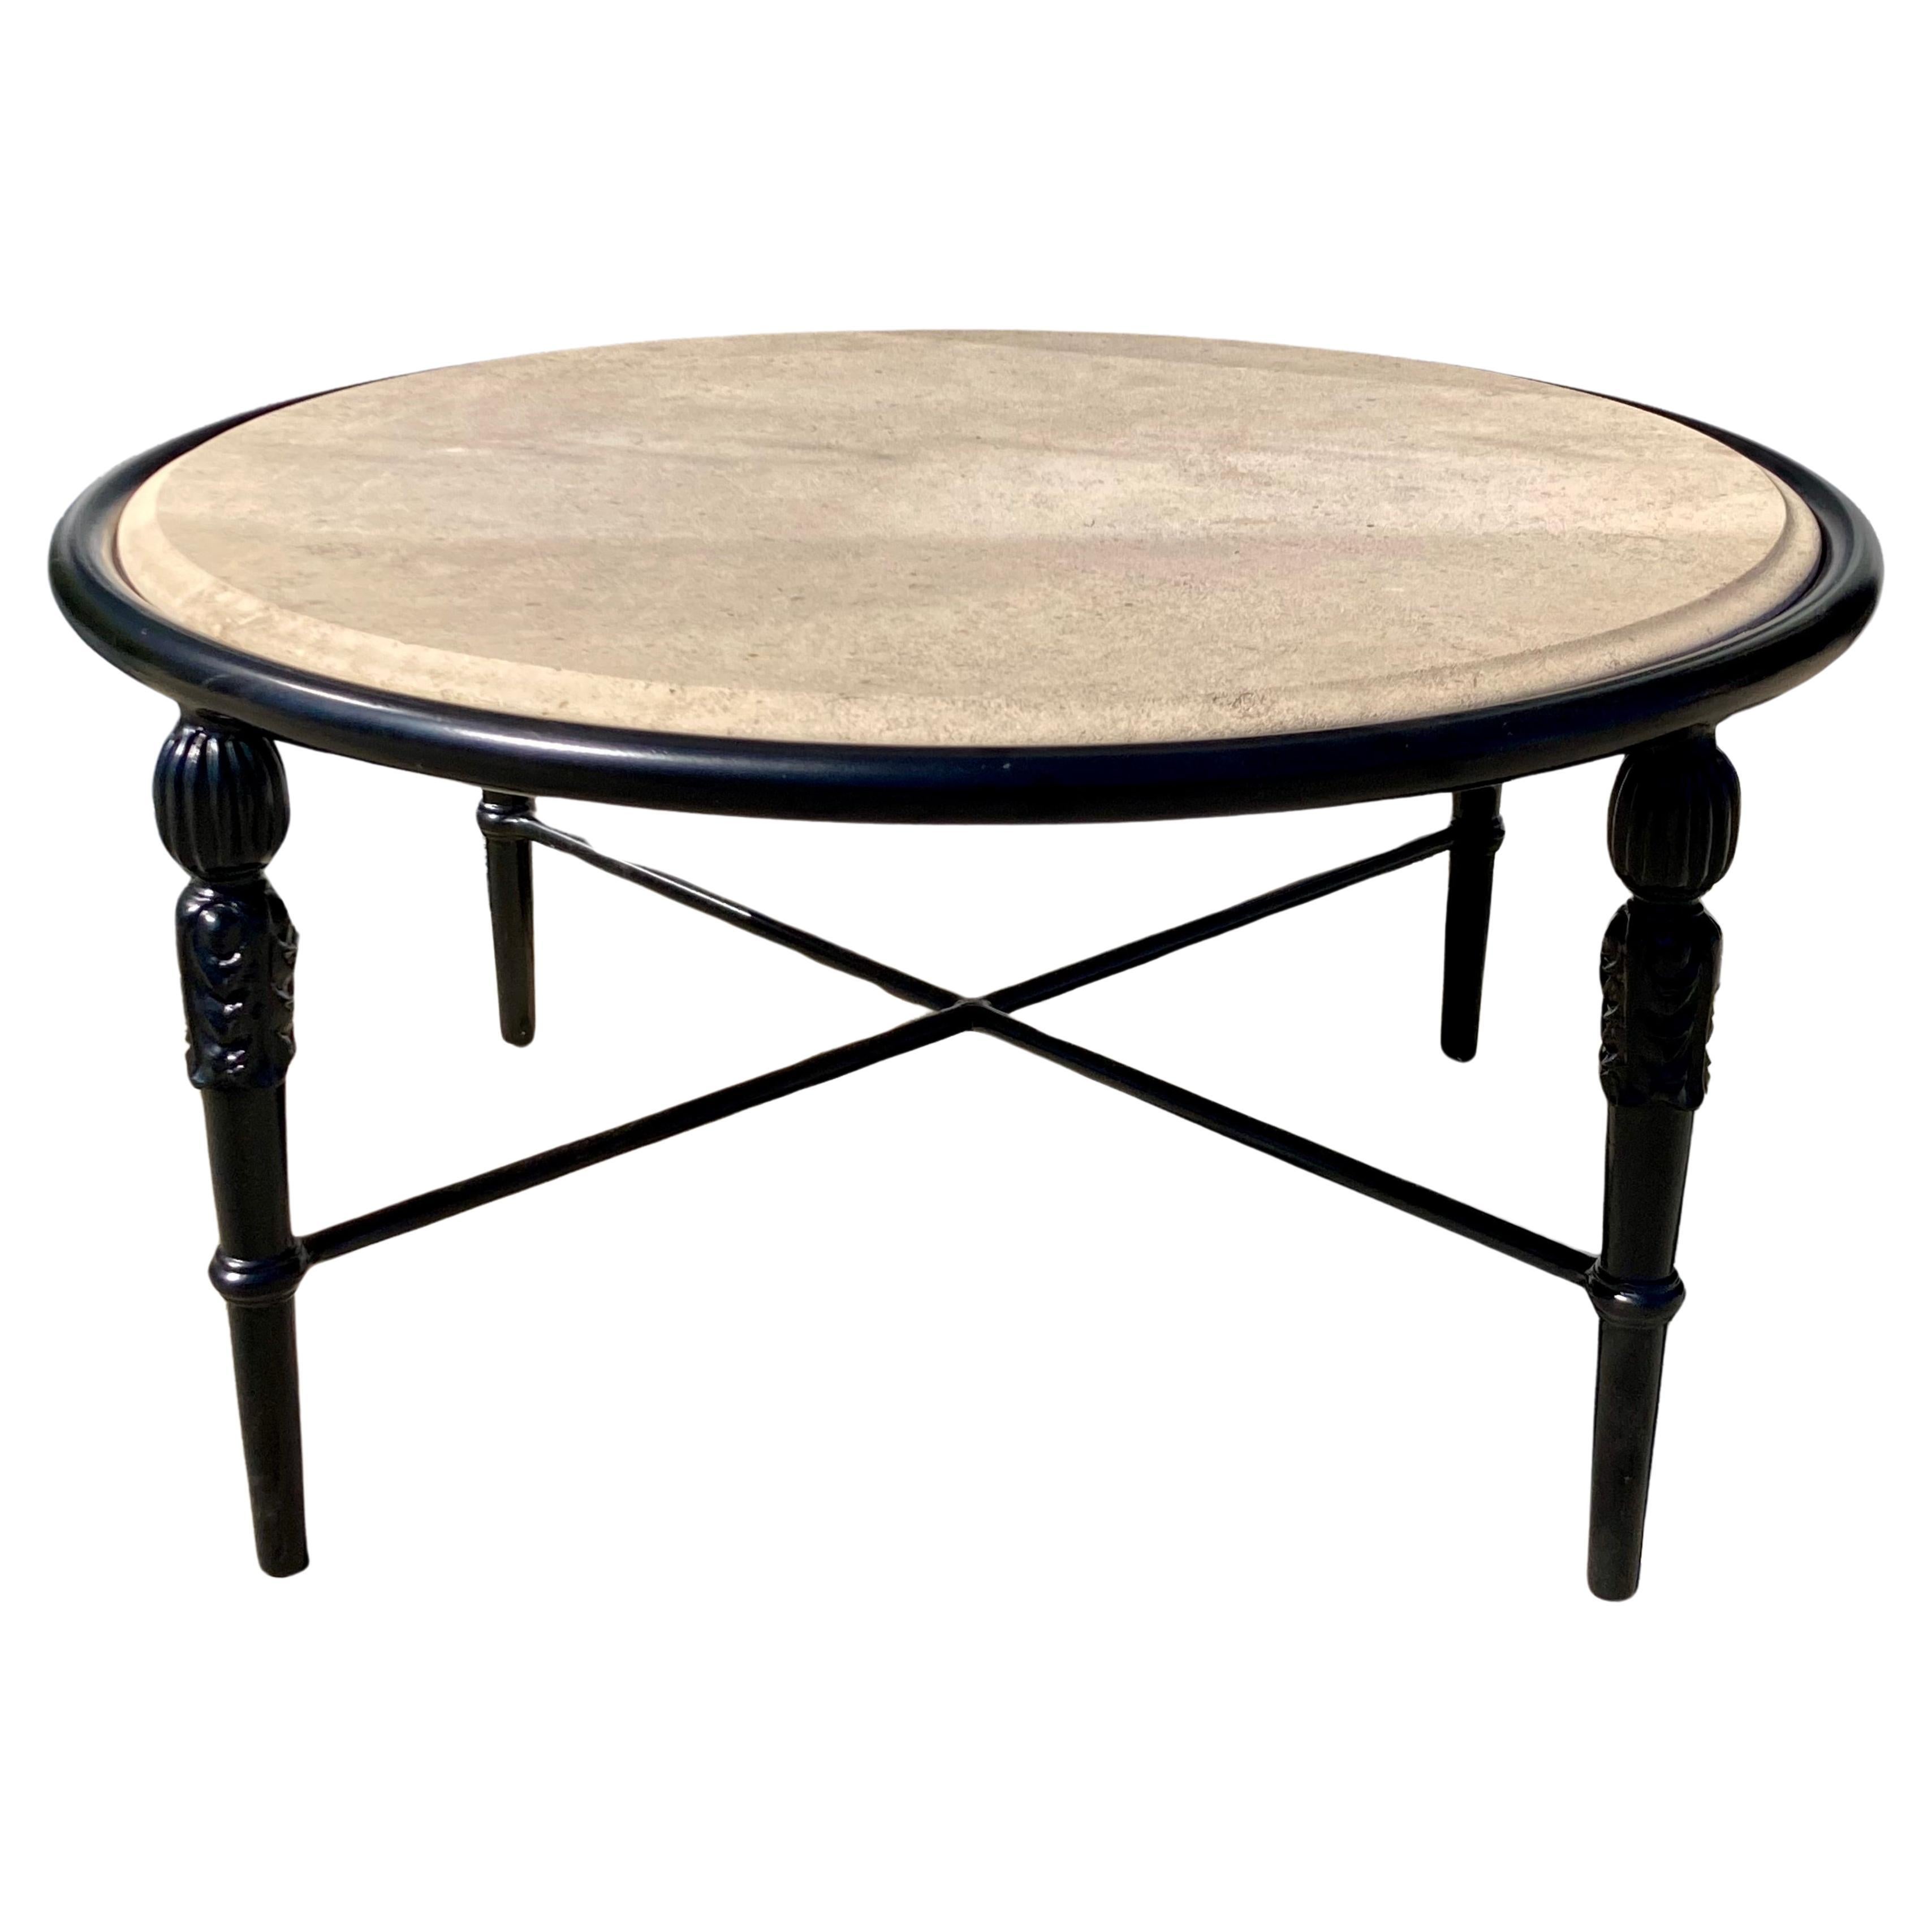 Michael Taylor Montecito Round Patio Coffee Table With Stone Top